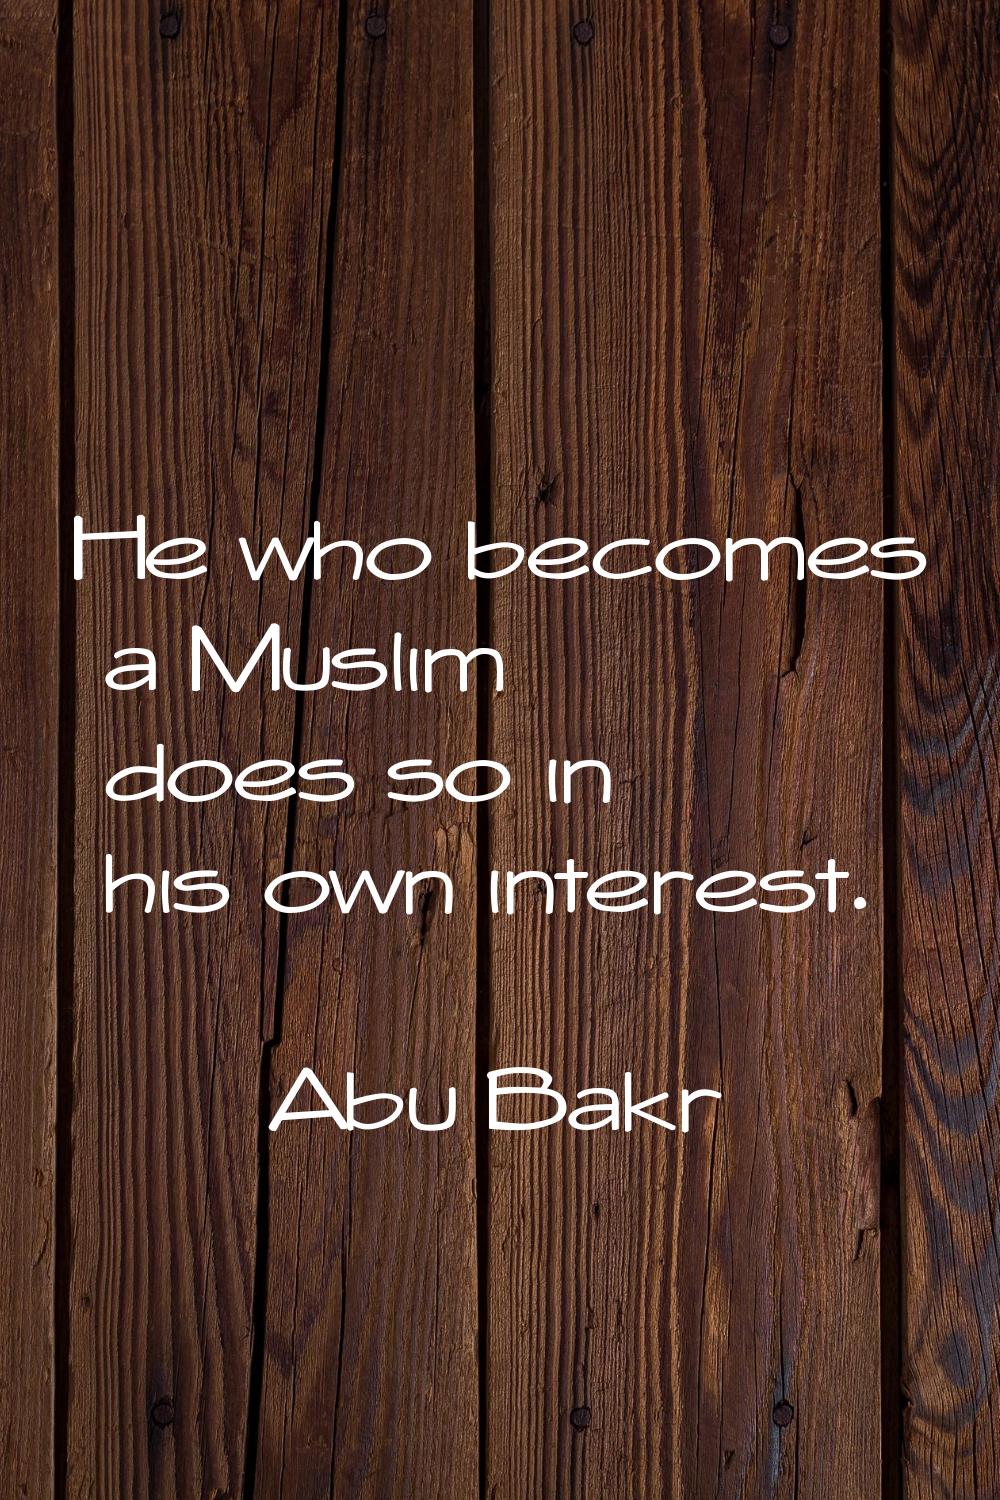 He who becomes a Muslim does so in his own interest.